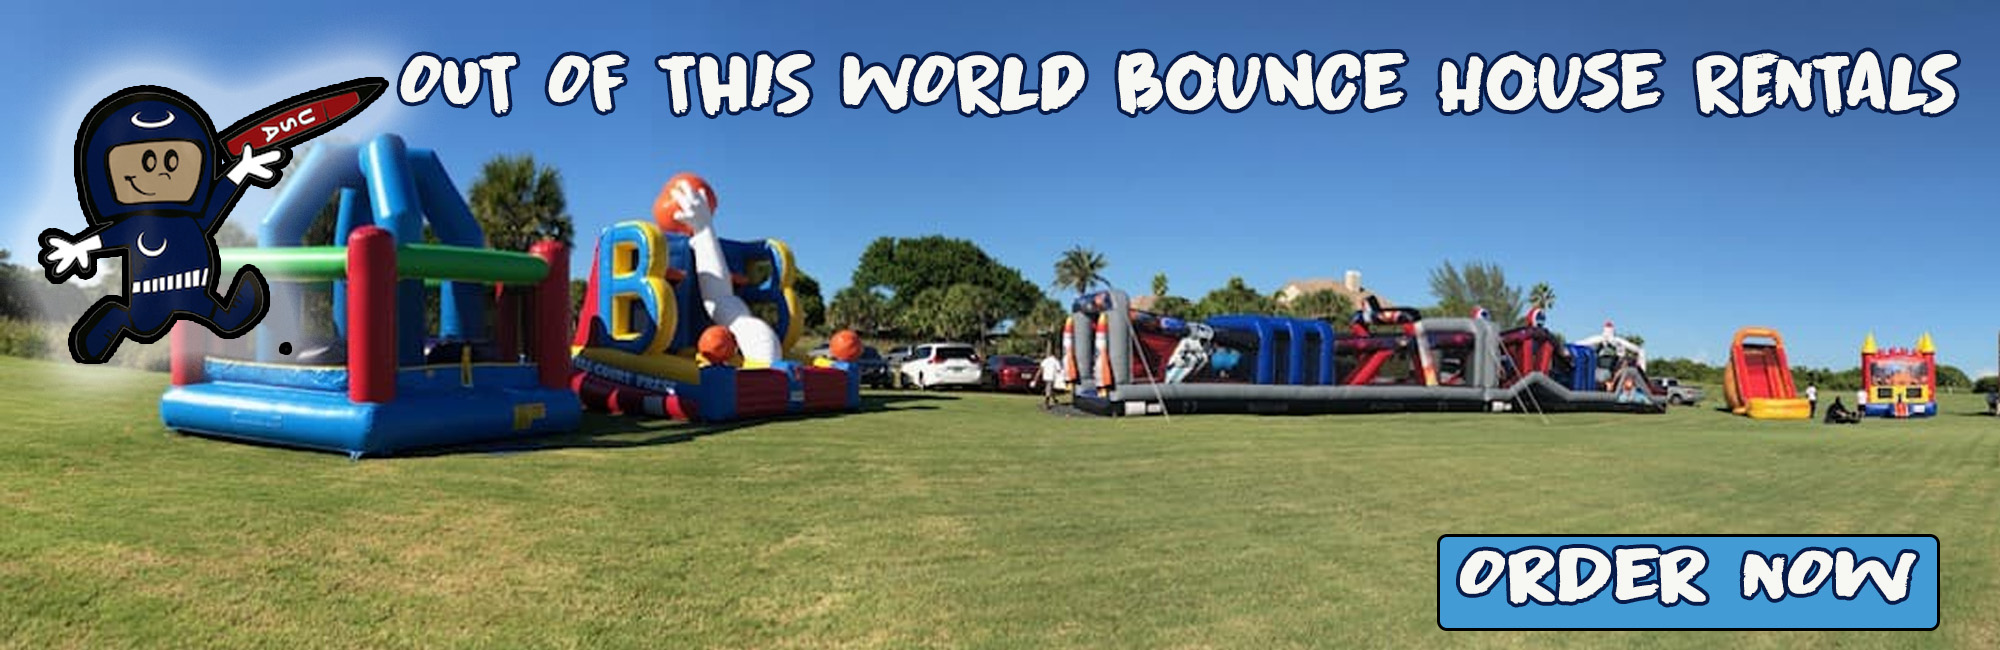 Bounce House Rentals Fellsmere From Call The Moon Man